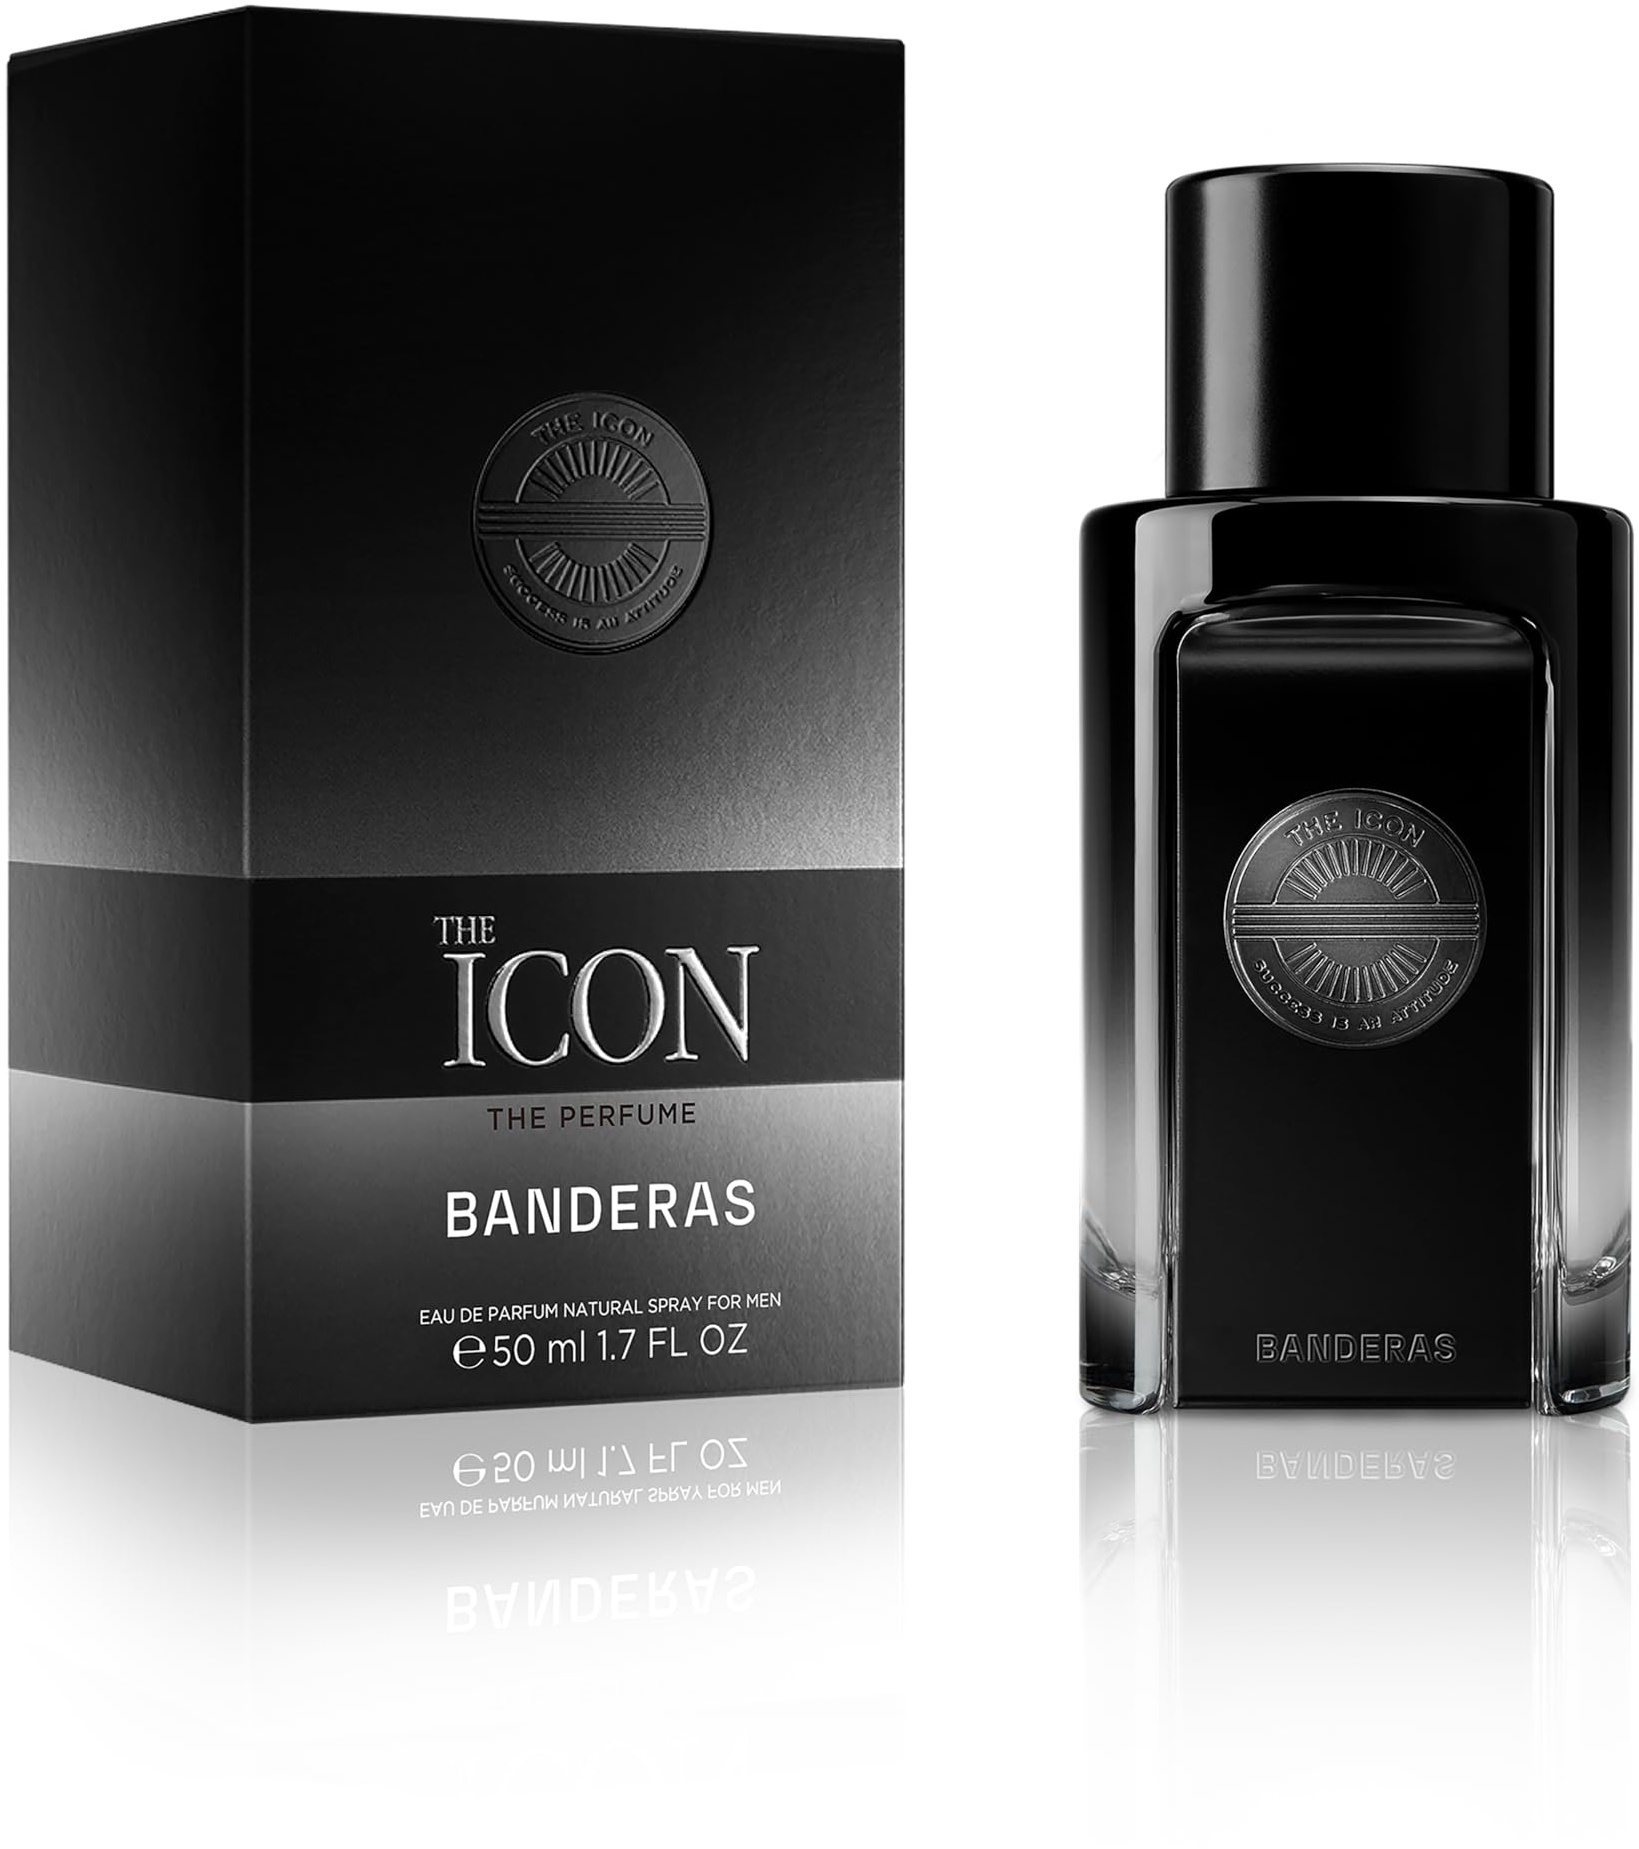 The ICON by Antonio Banderas Eau de Perfume for Men - Long Lasting - Virile, Elegant, Trendy and Sexy Scent - Wood, Amber, and Sandalwood Notes - Ideal for Special Events - 50ml